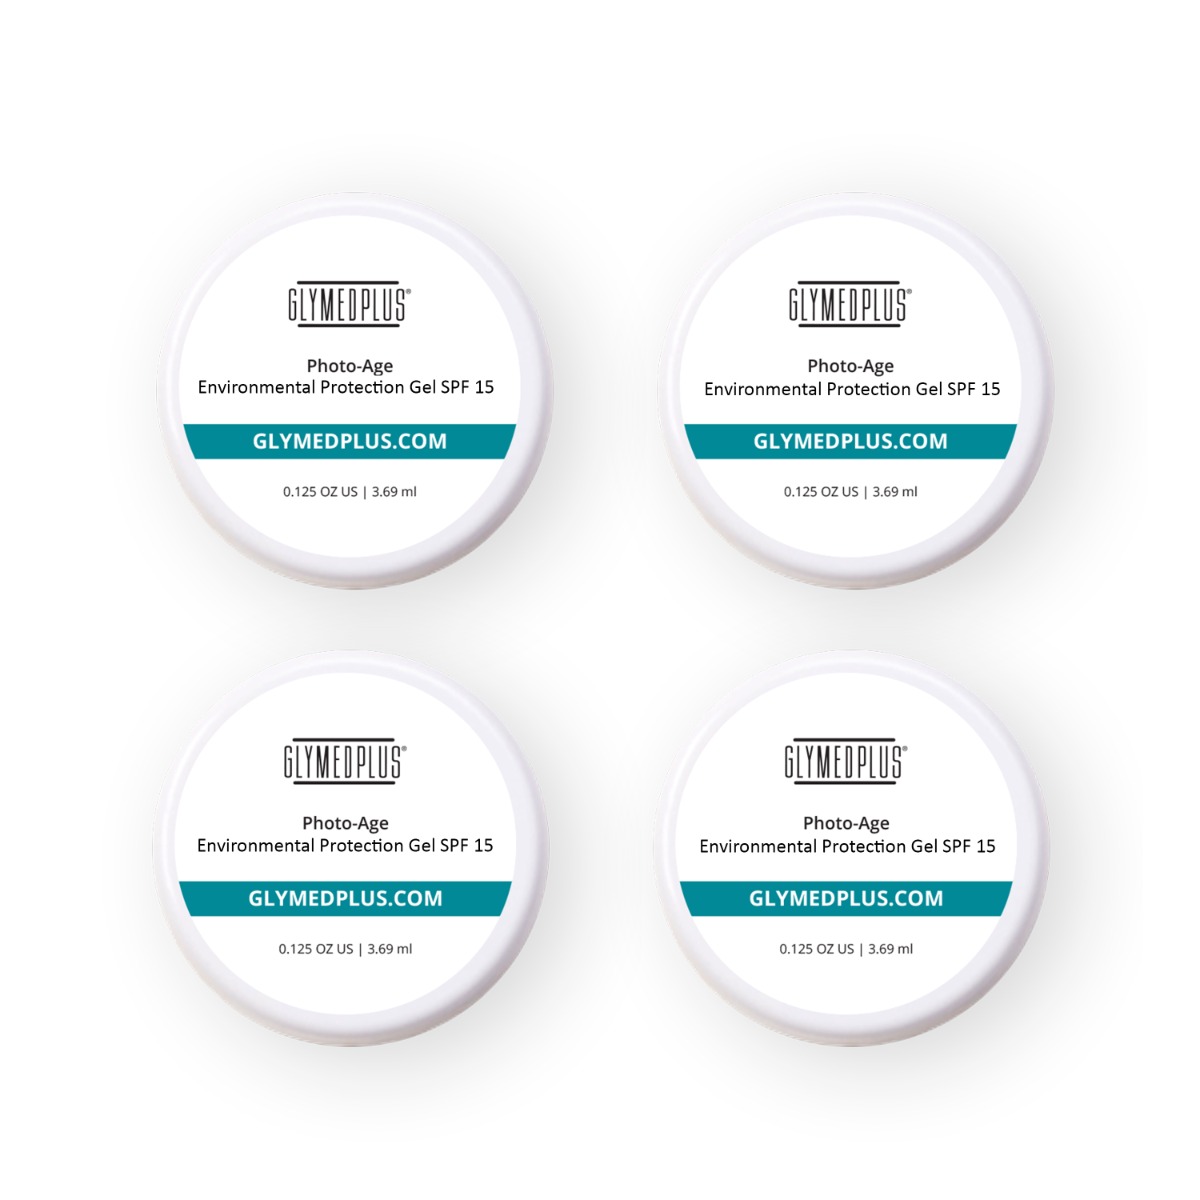 Photo-Age Environmental Protection Gel SPF 15 - Sample 4 Pack